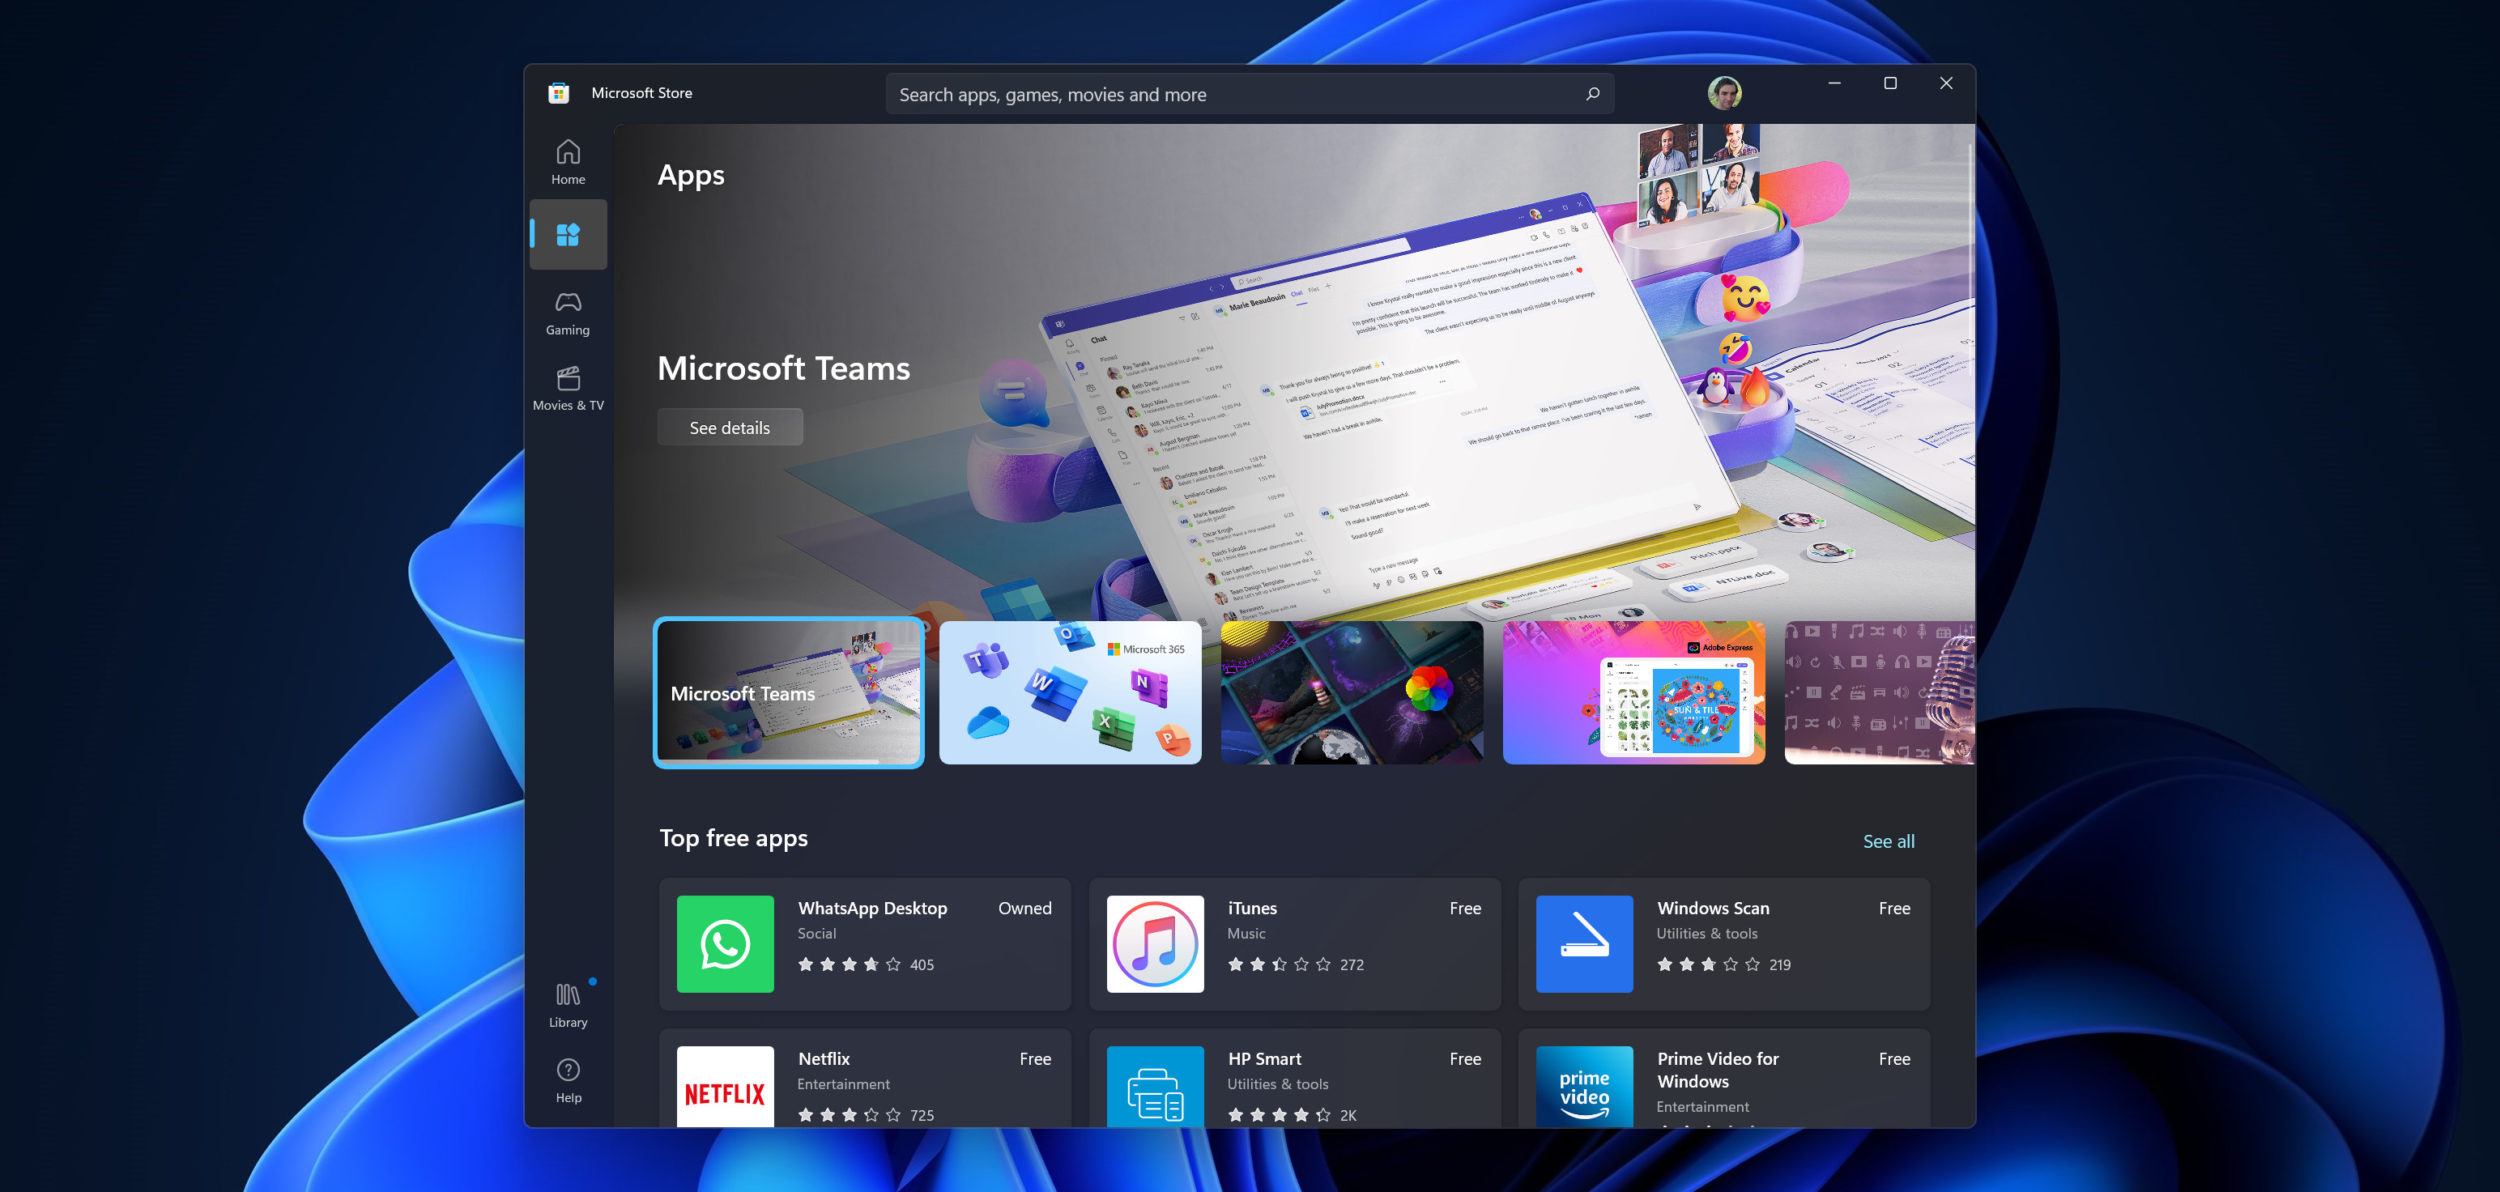 The Microsoft Store showing the home page, with Microsoft Teams being featured in the spotlight